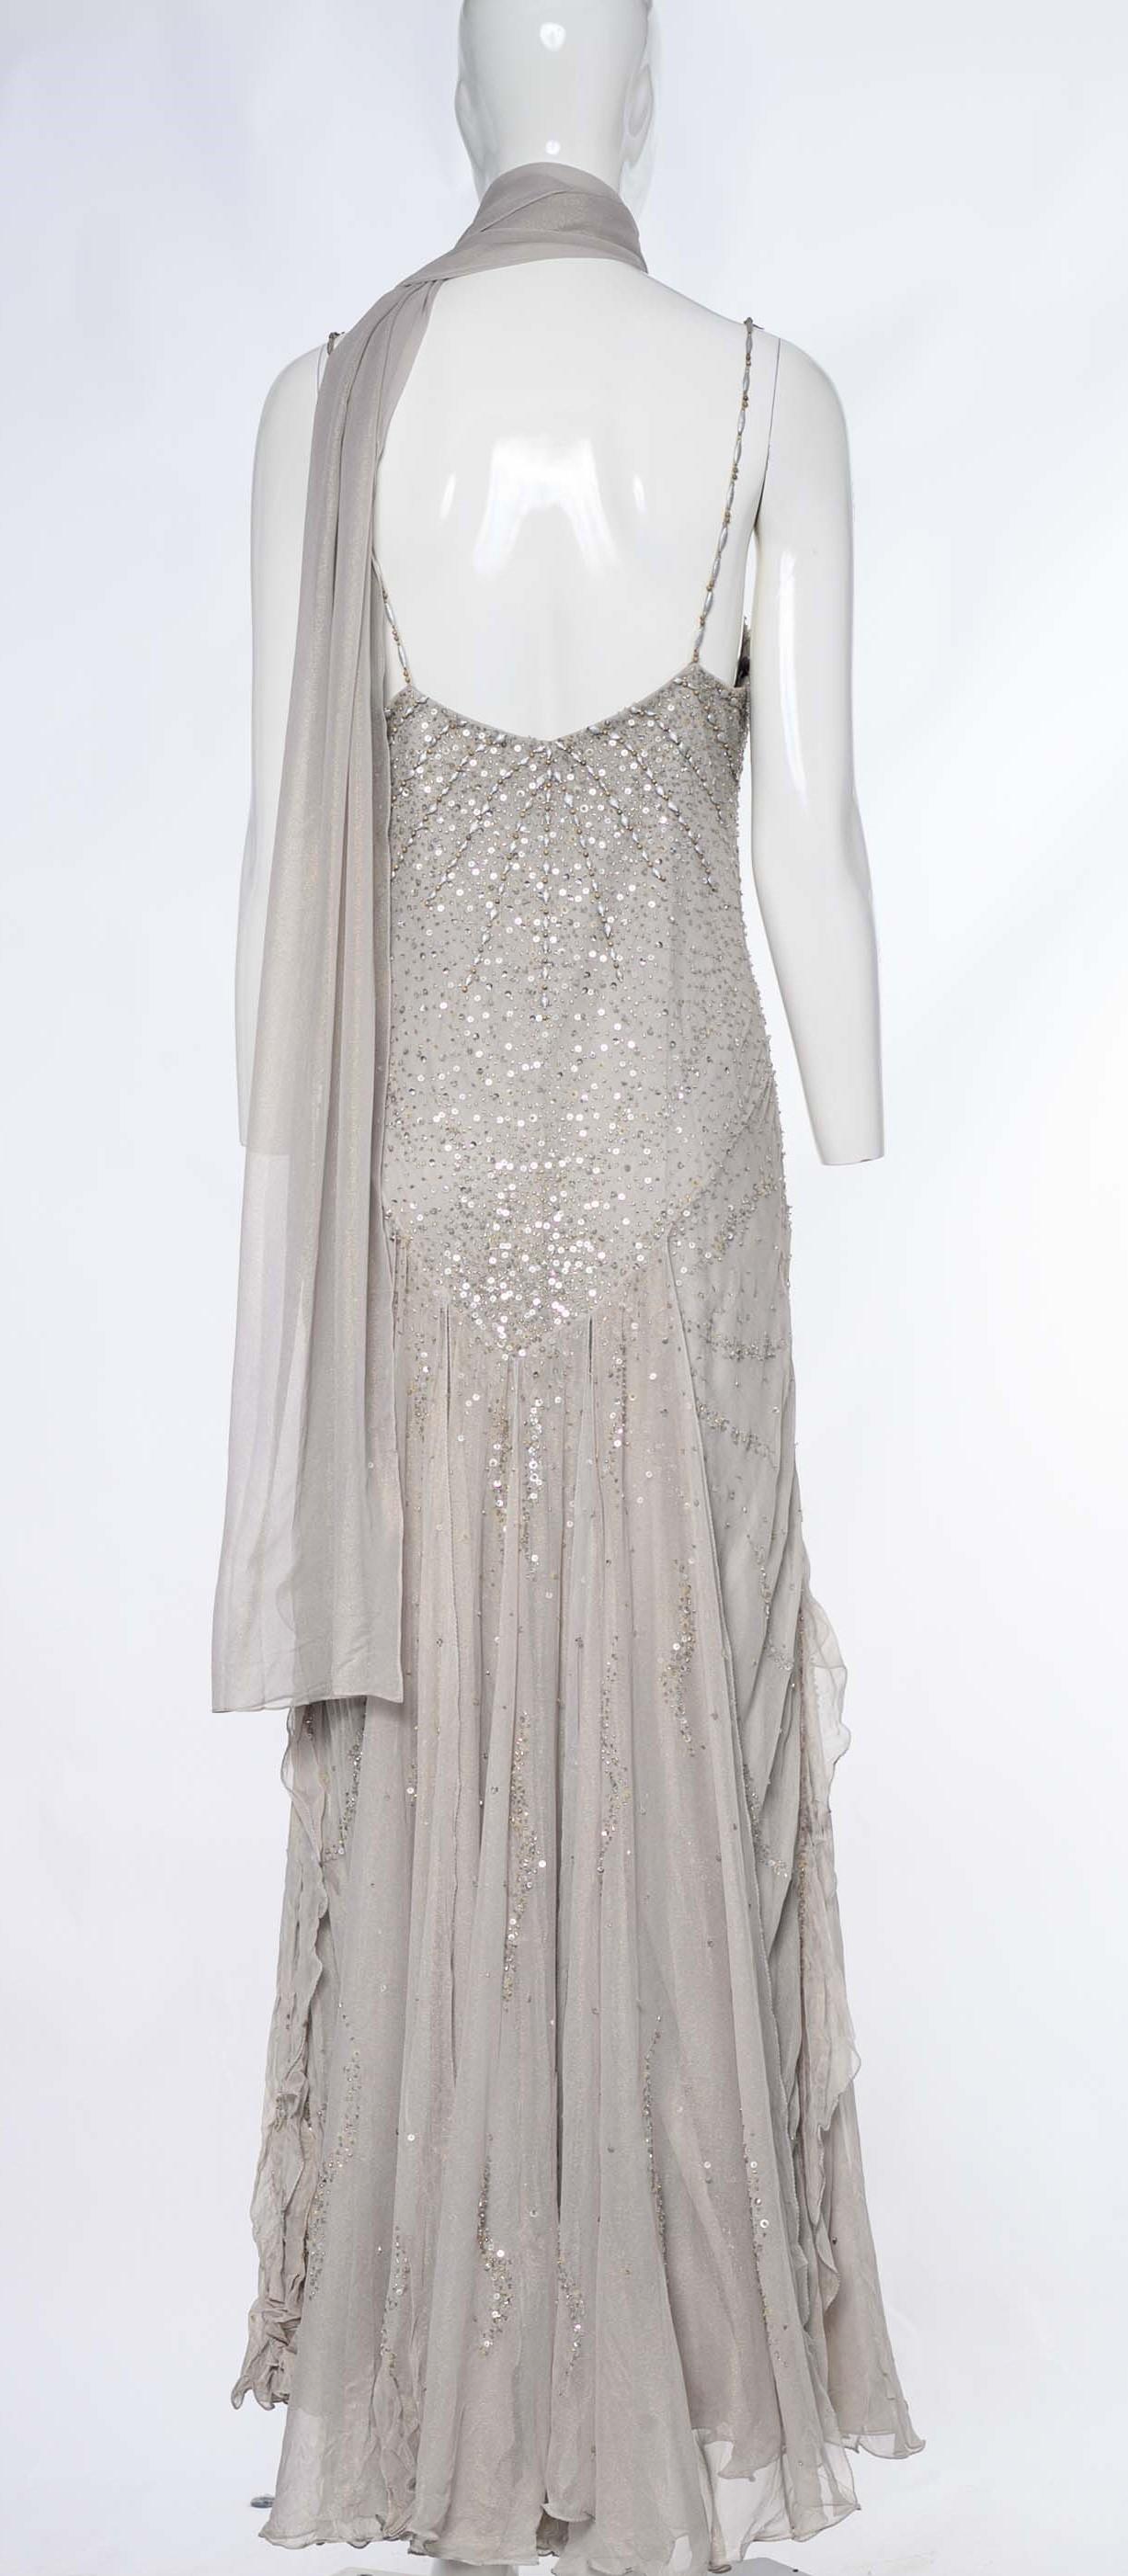 Crafted from soft silk fabric, this dress emanates elegance and sophistication. The light grey sheer fabric is enhanced with a subtle gold shimmer, adding a touch of opulence and creating a radiant effect.

The dress is adorned with tonal sequin and